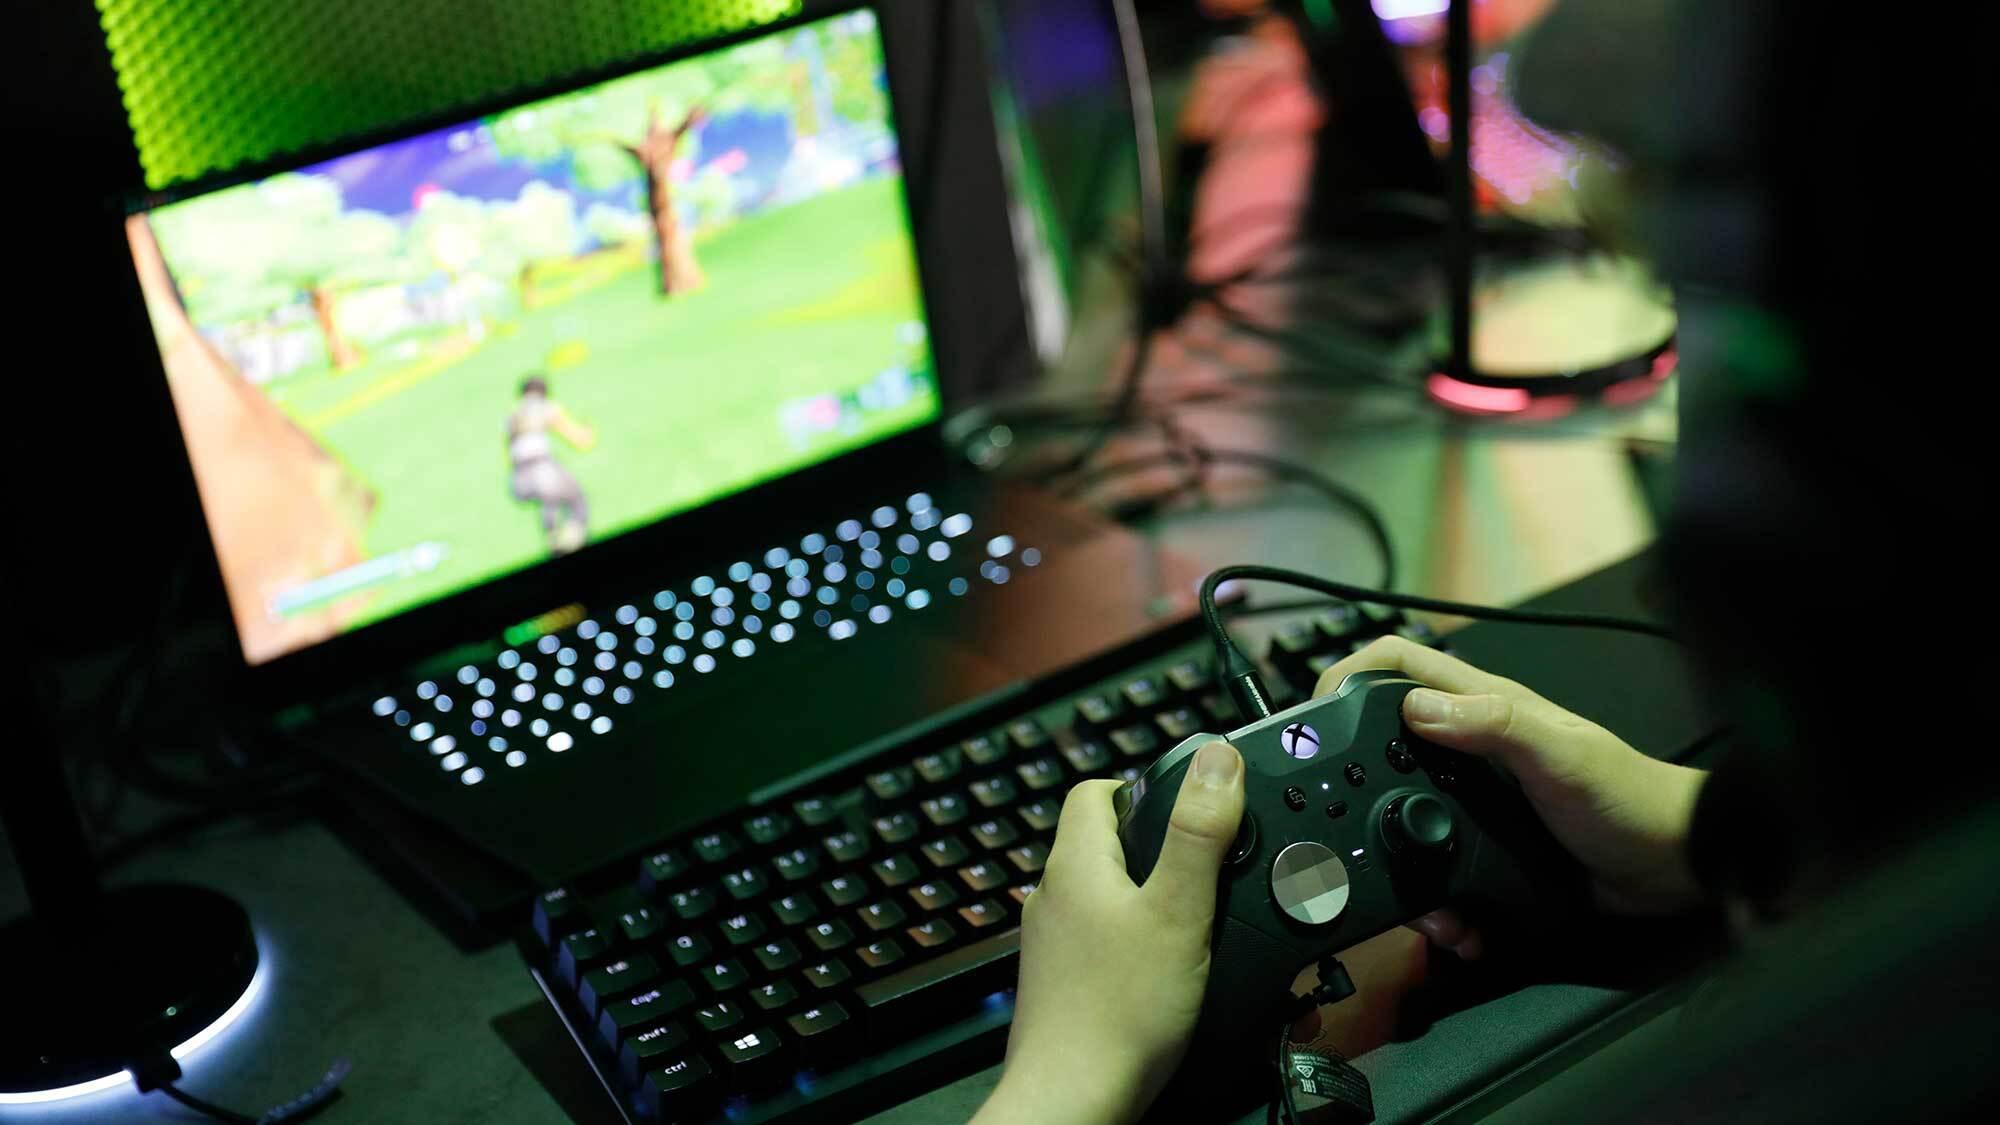 ‘Fortnite’ owner agrees to $520 million FTC settlement in messy child privacy case